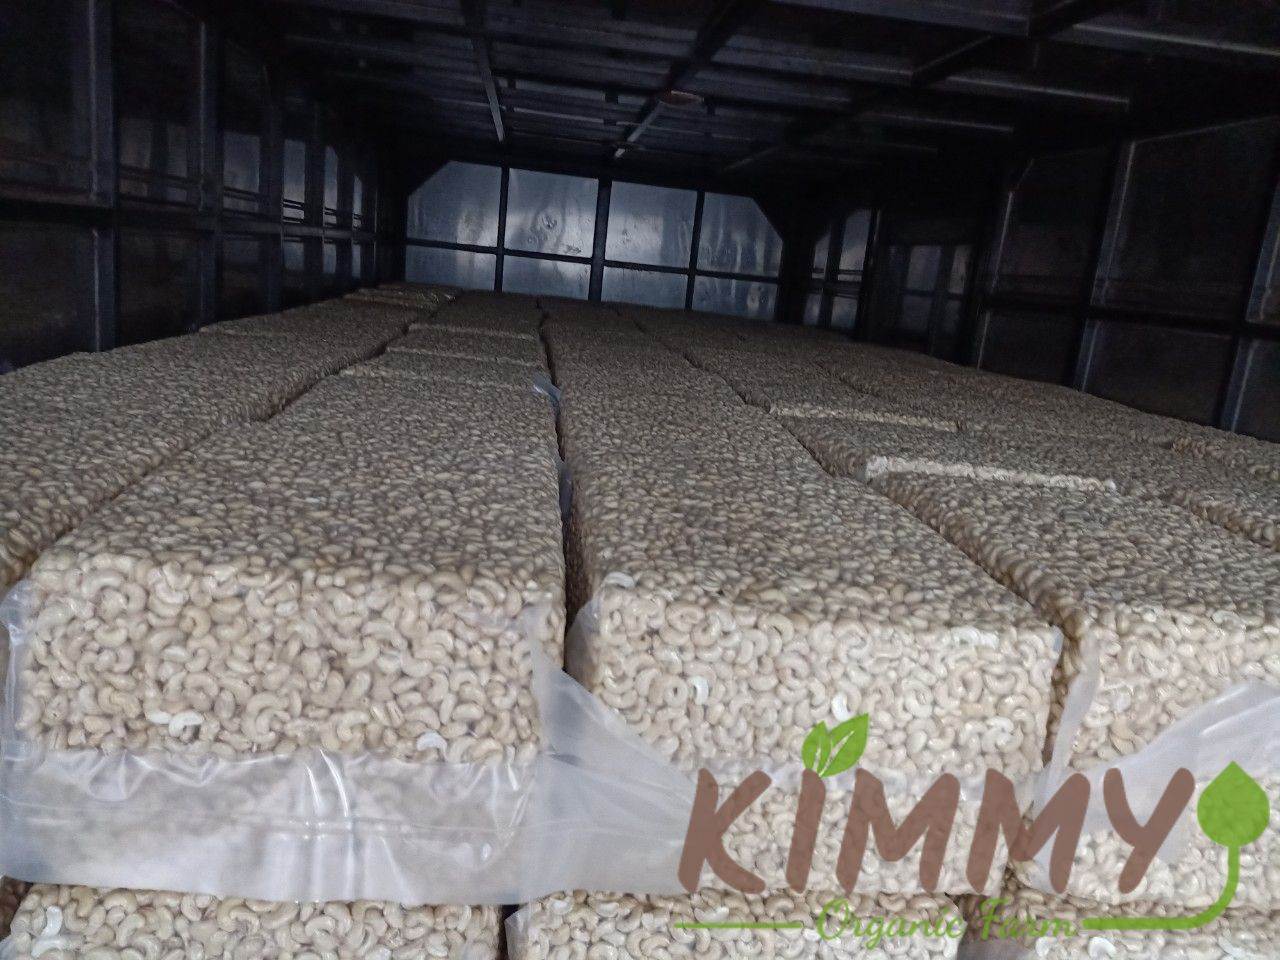 2 tons of cashew kernels ready for export